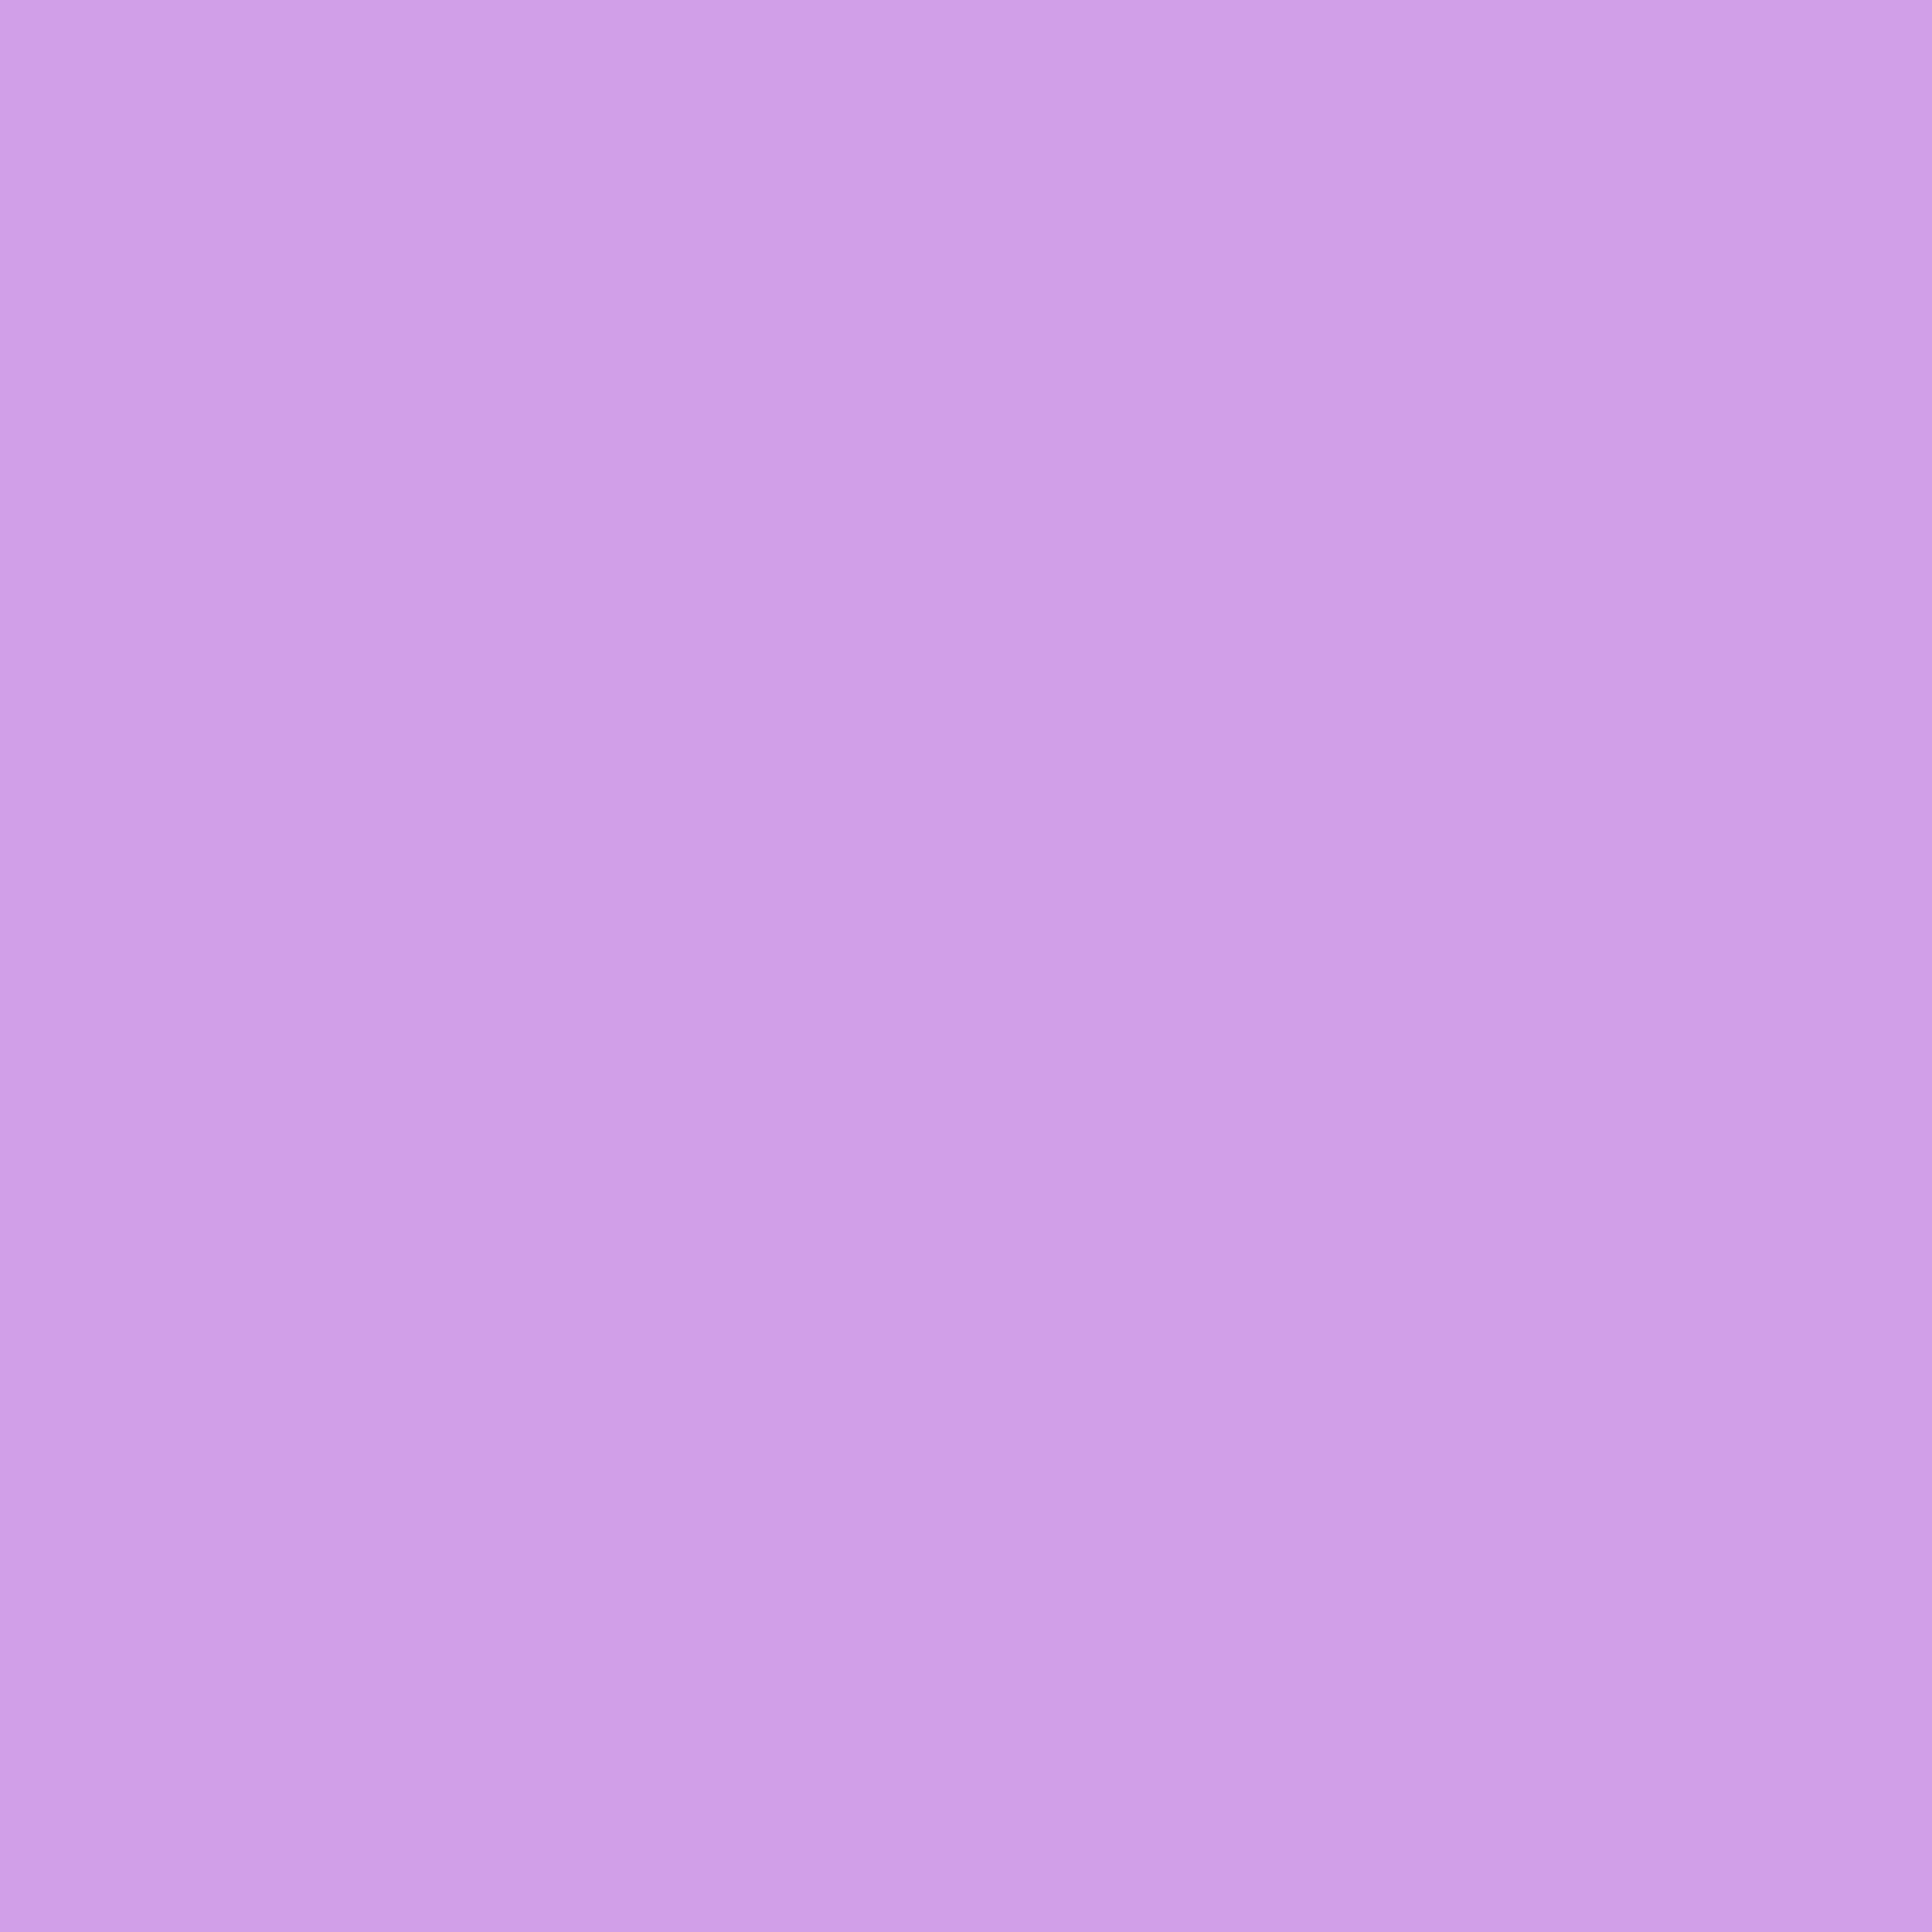 3600x3600 Bright Ube Solid Color Background